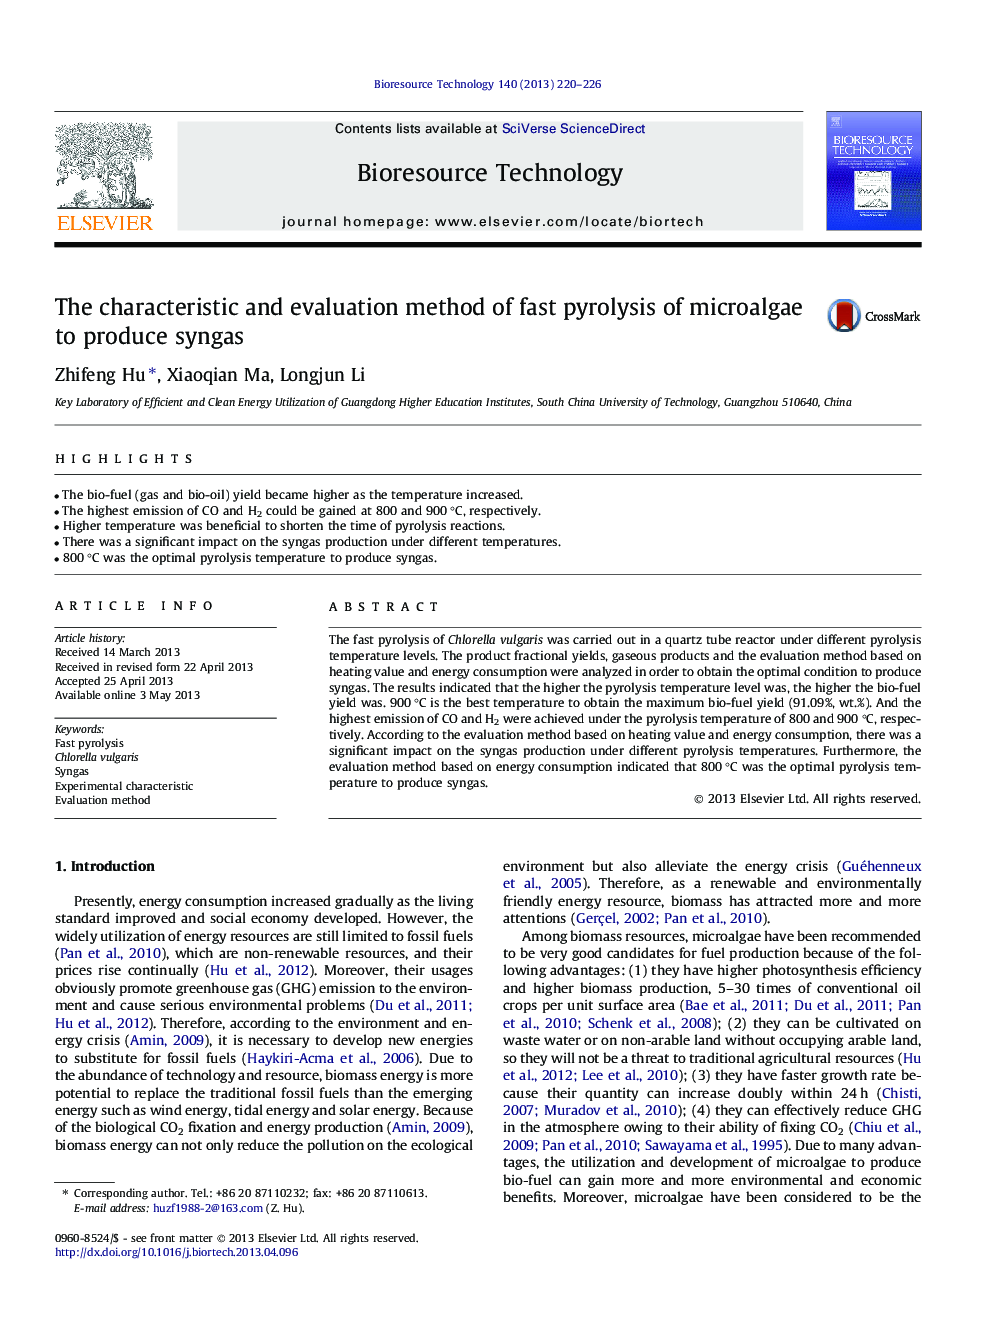 The characteristic and evaluation method of fast pyrolysis of microalgae to produce syngas